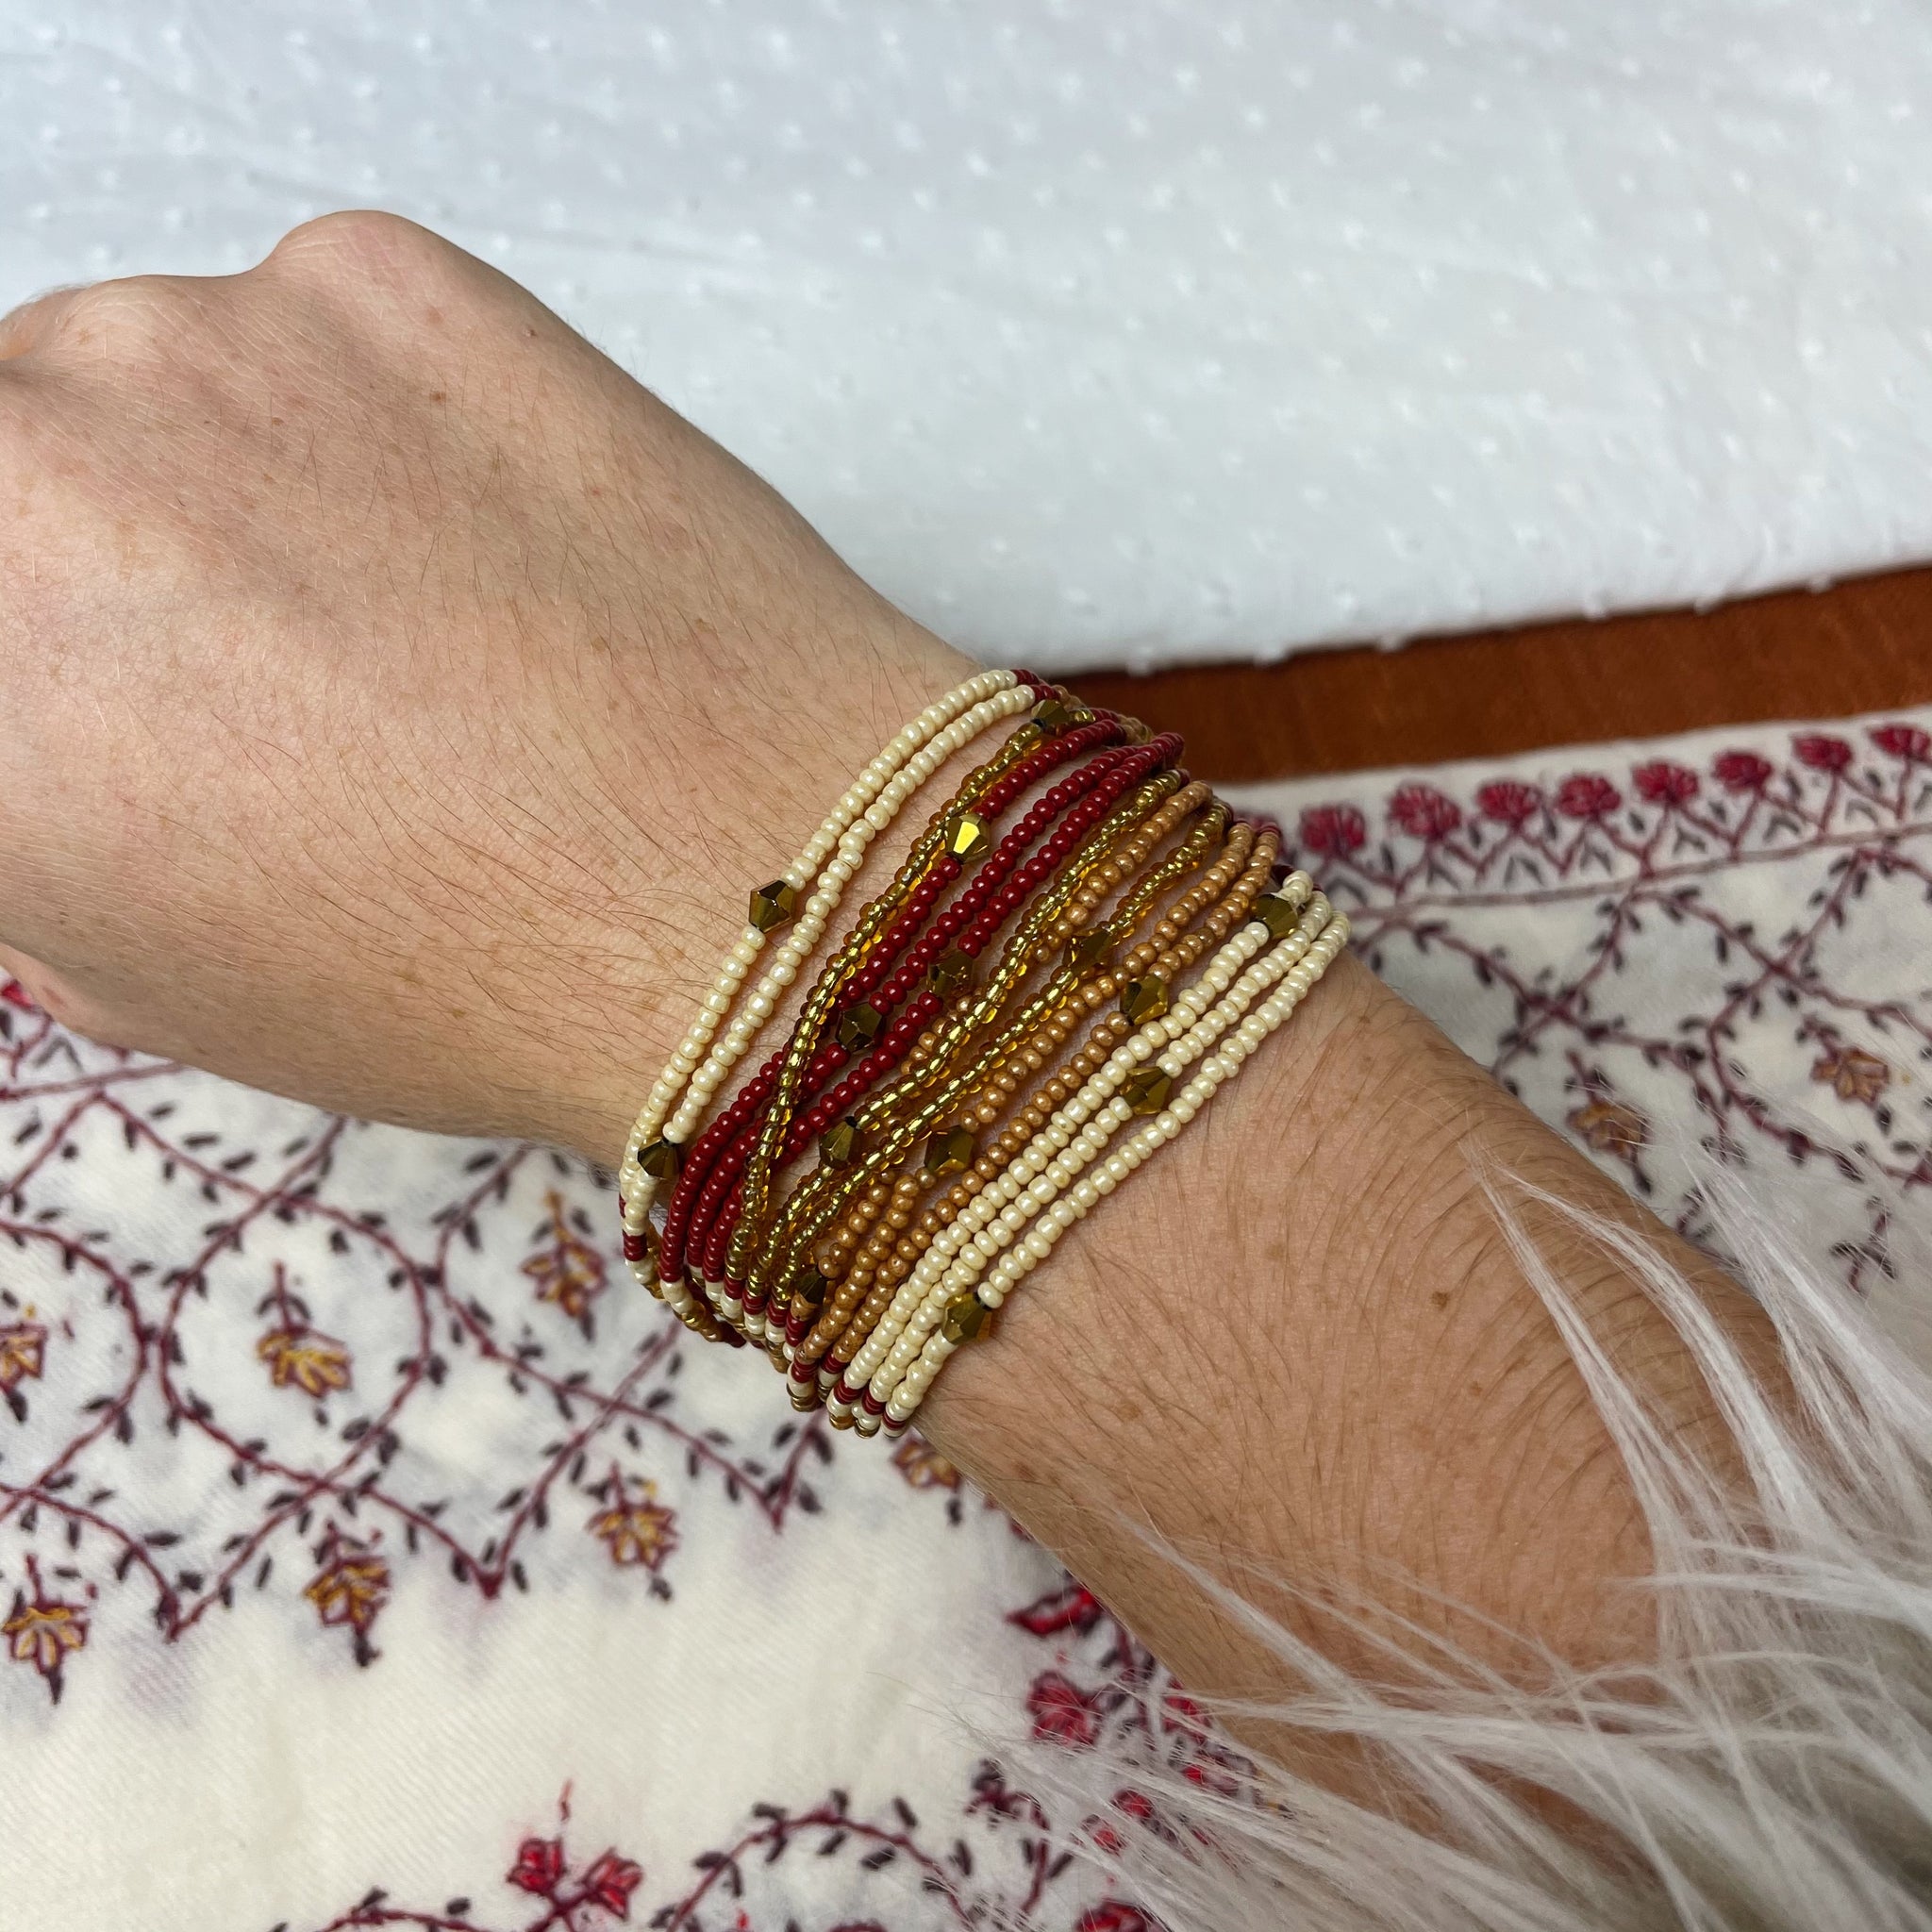 Multiple layered beaded bracelet with cream, copper, gold and maroon beads.